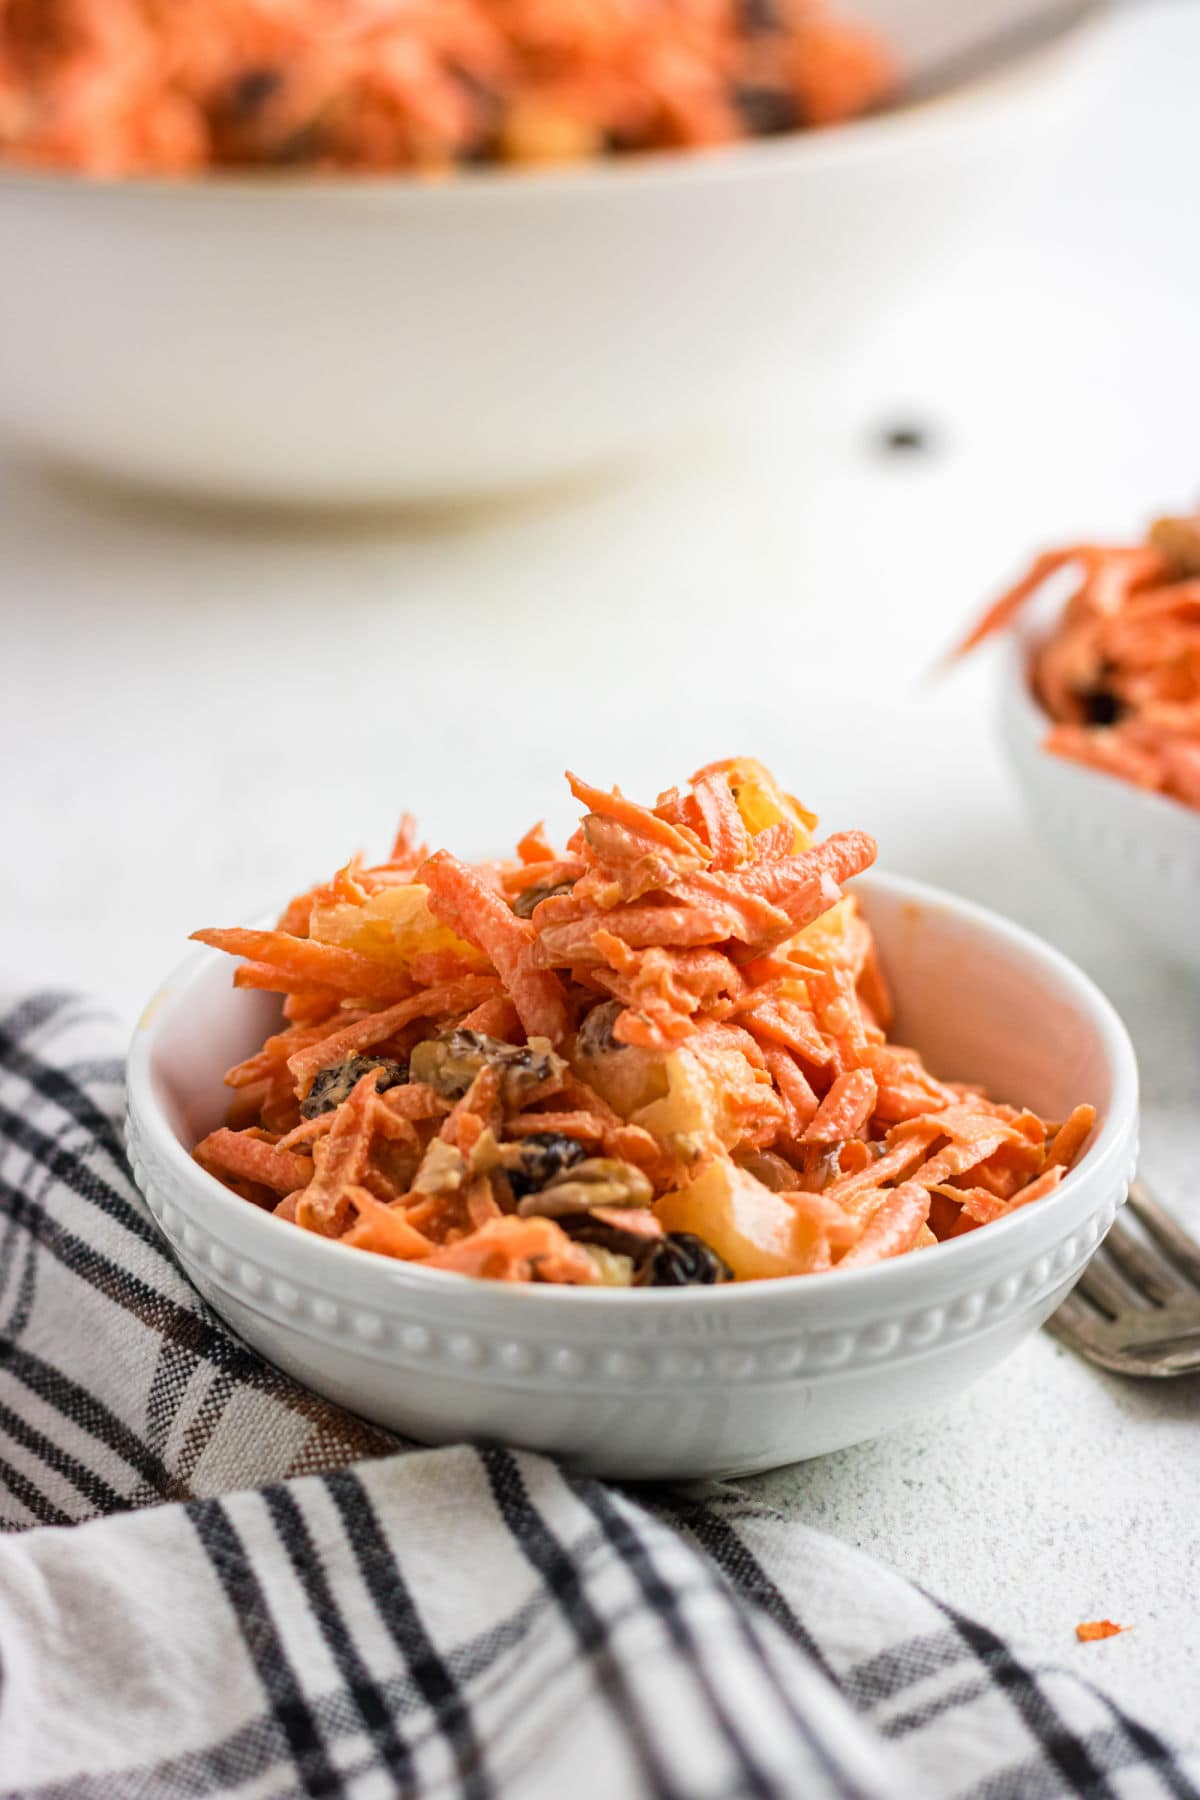 A serving of carrot raisin salad with pineapple and pecans in a small, white bowl.